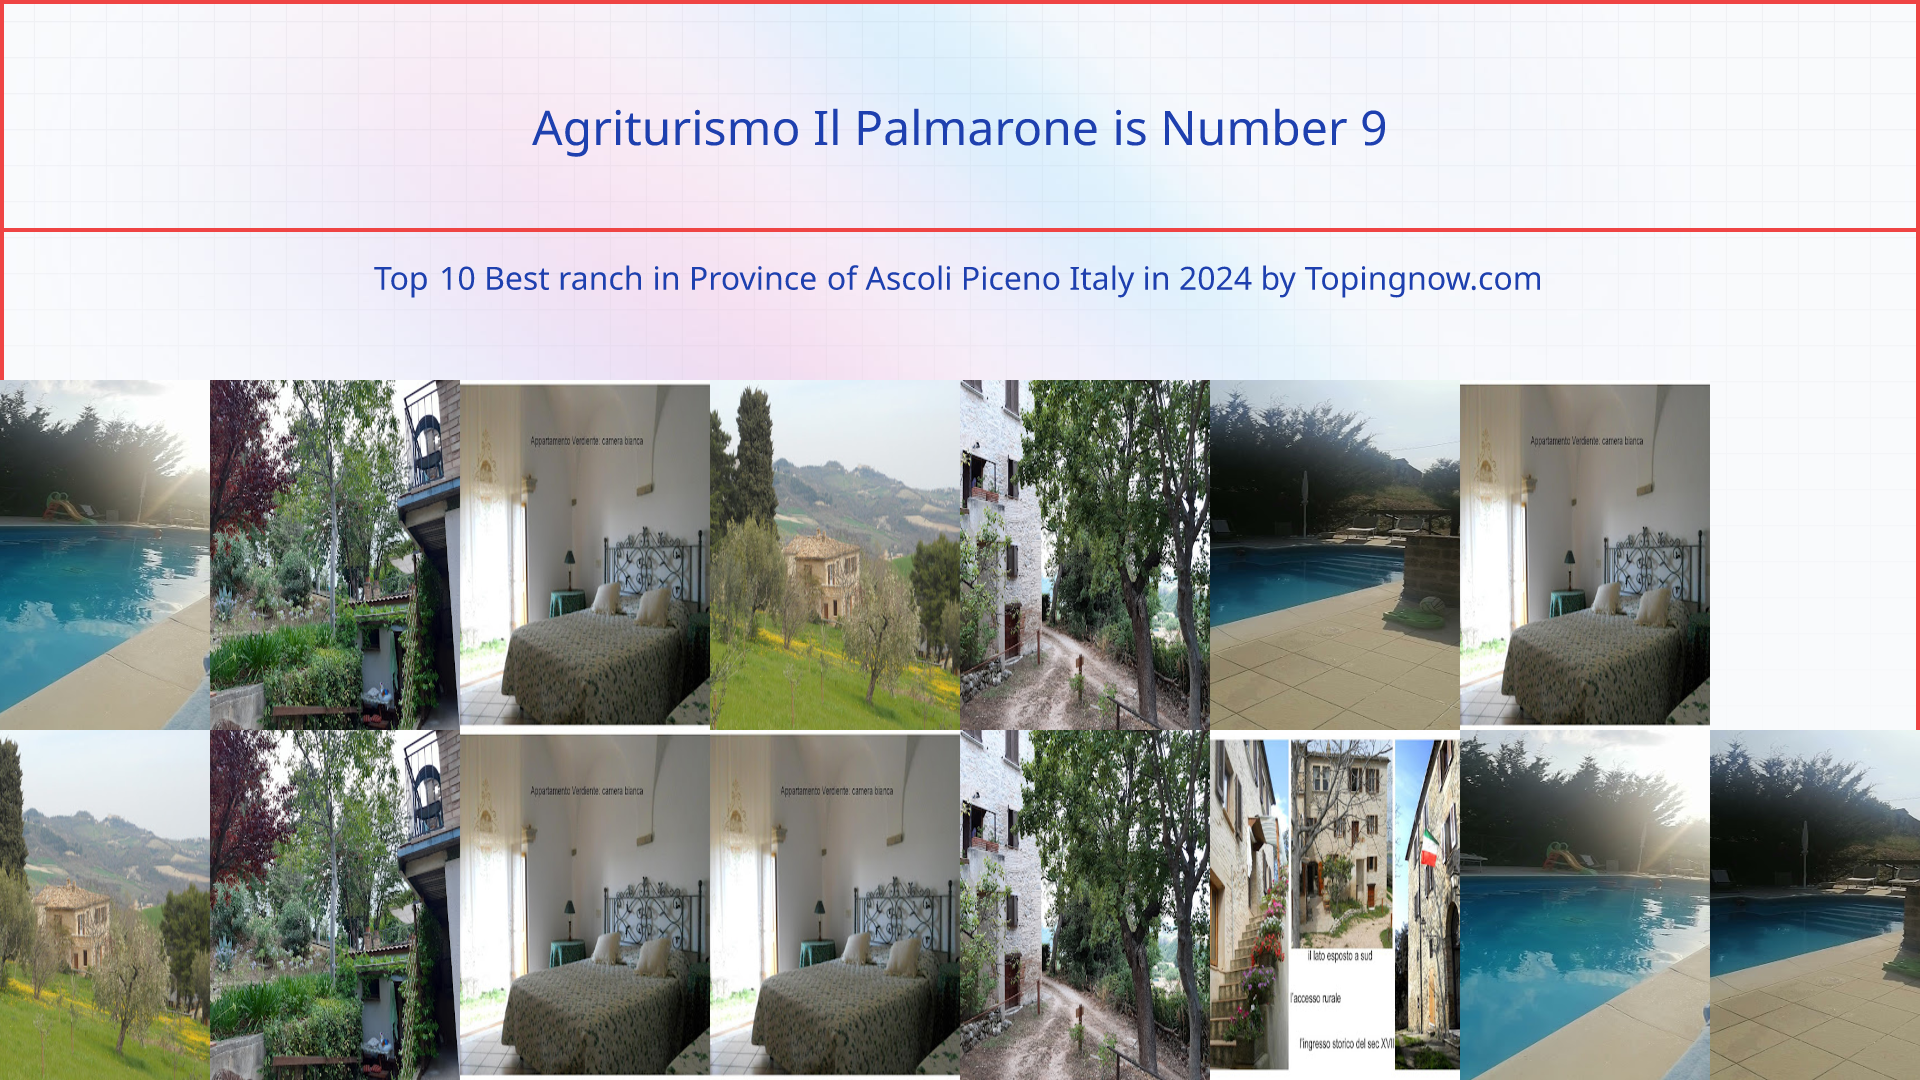 Agriturismo Il Palmarone: Top 10 Best ranch in Province of Ascoli Piceno Italy in 2024